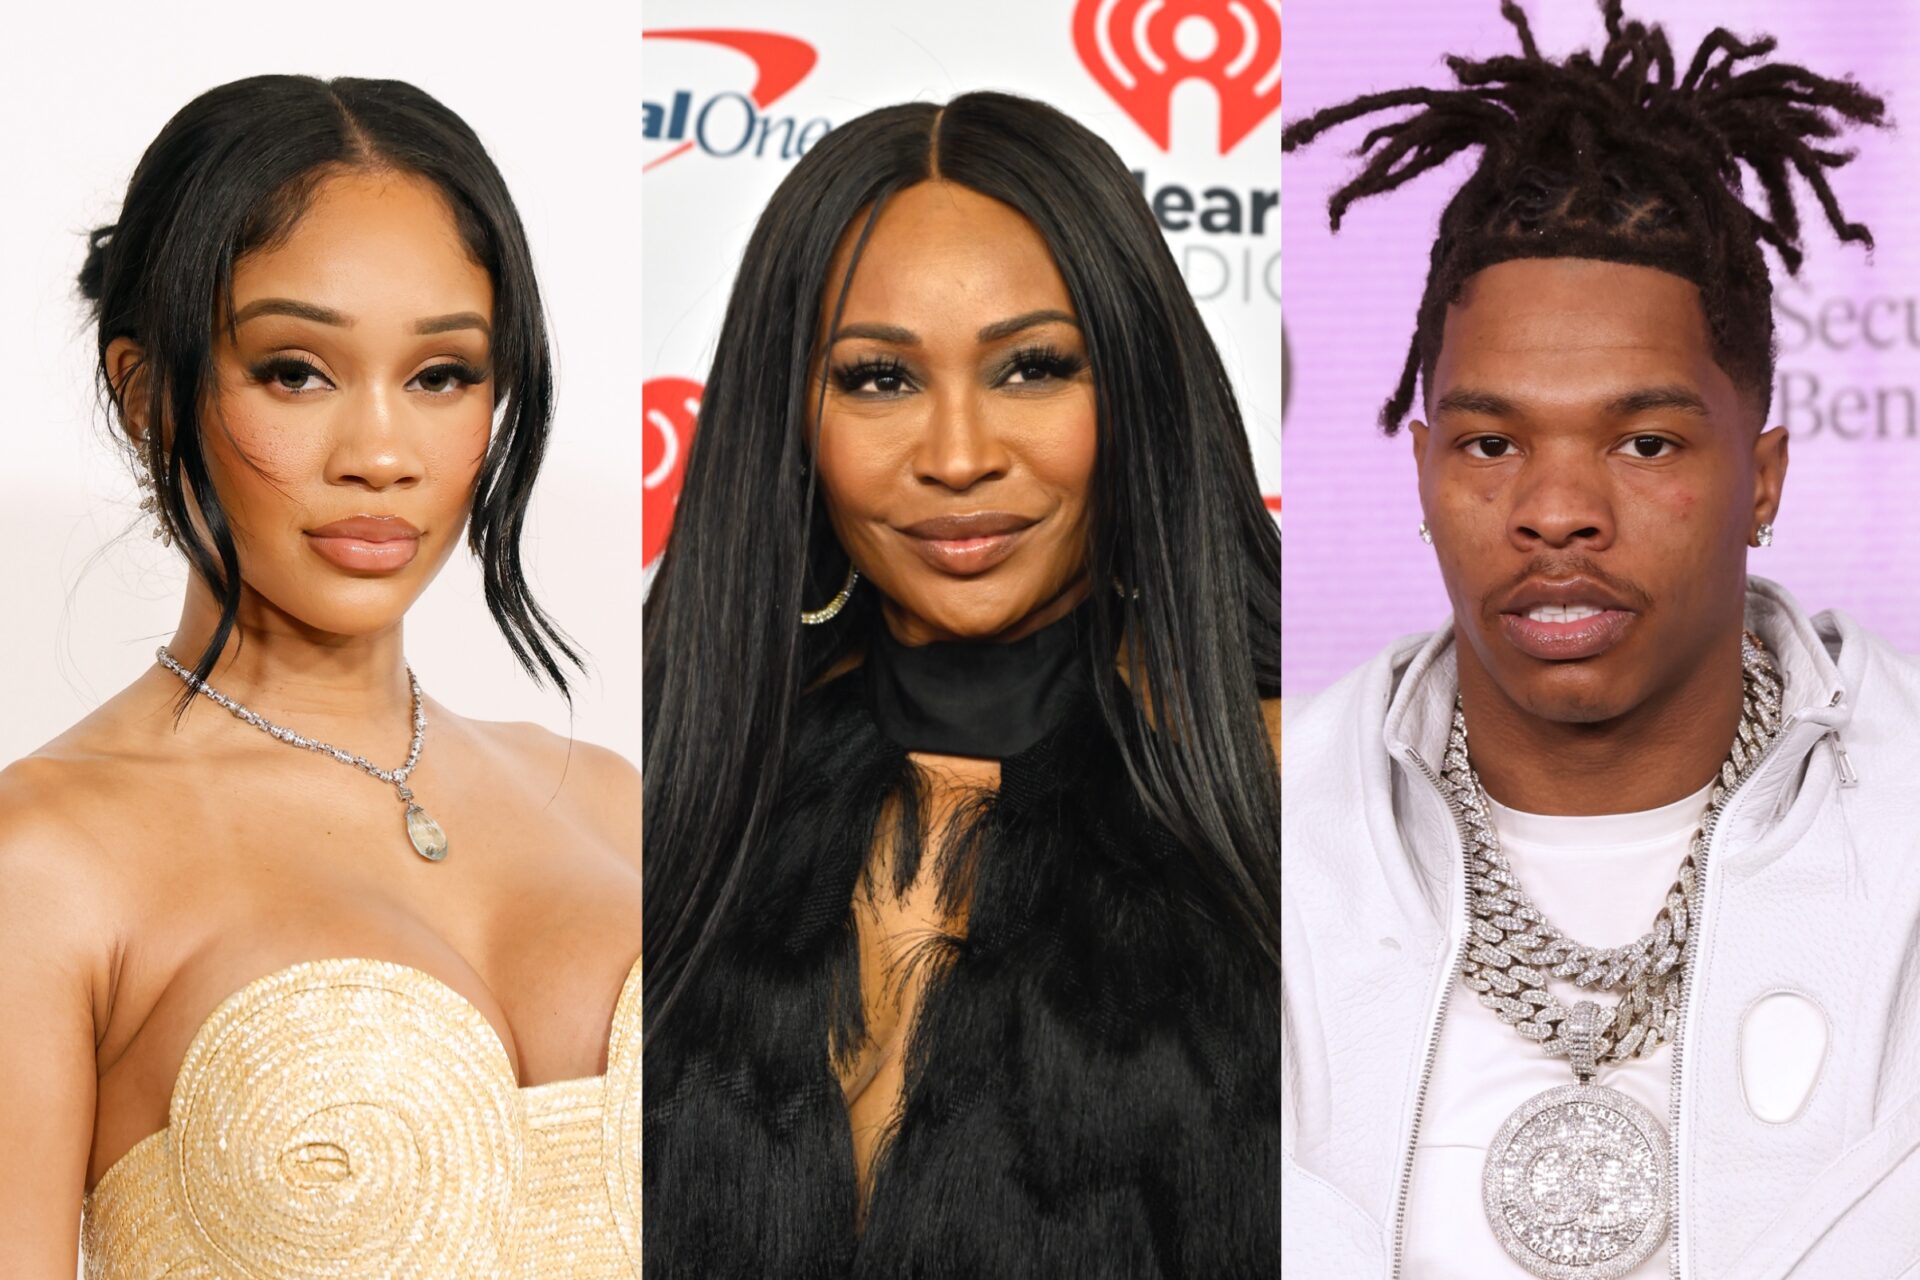 Season 3 Of ‘BMF’ Will Feature Lil Baby, Saweetie, And Cynthia Bailey As Guest Stars